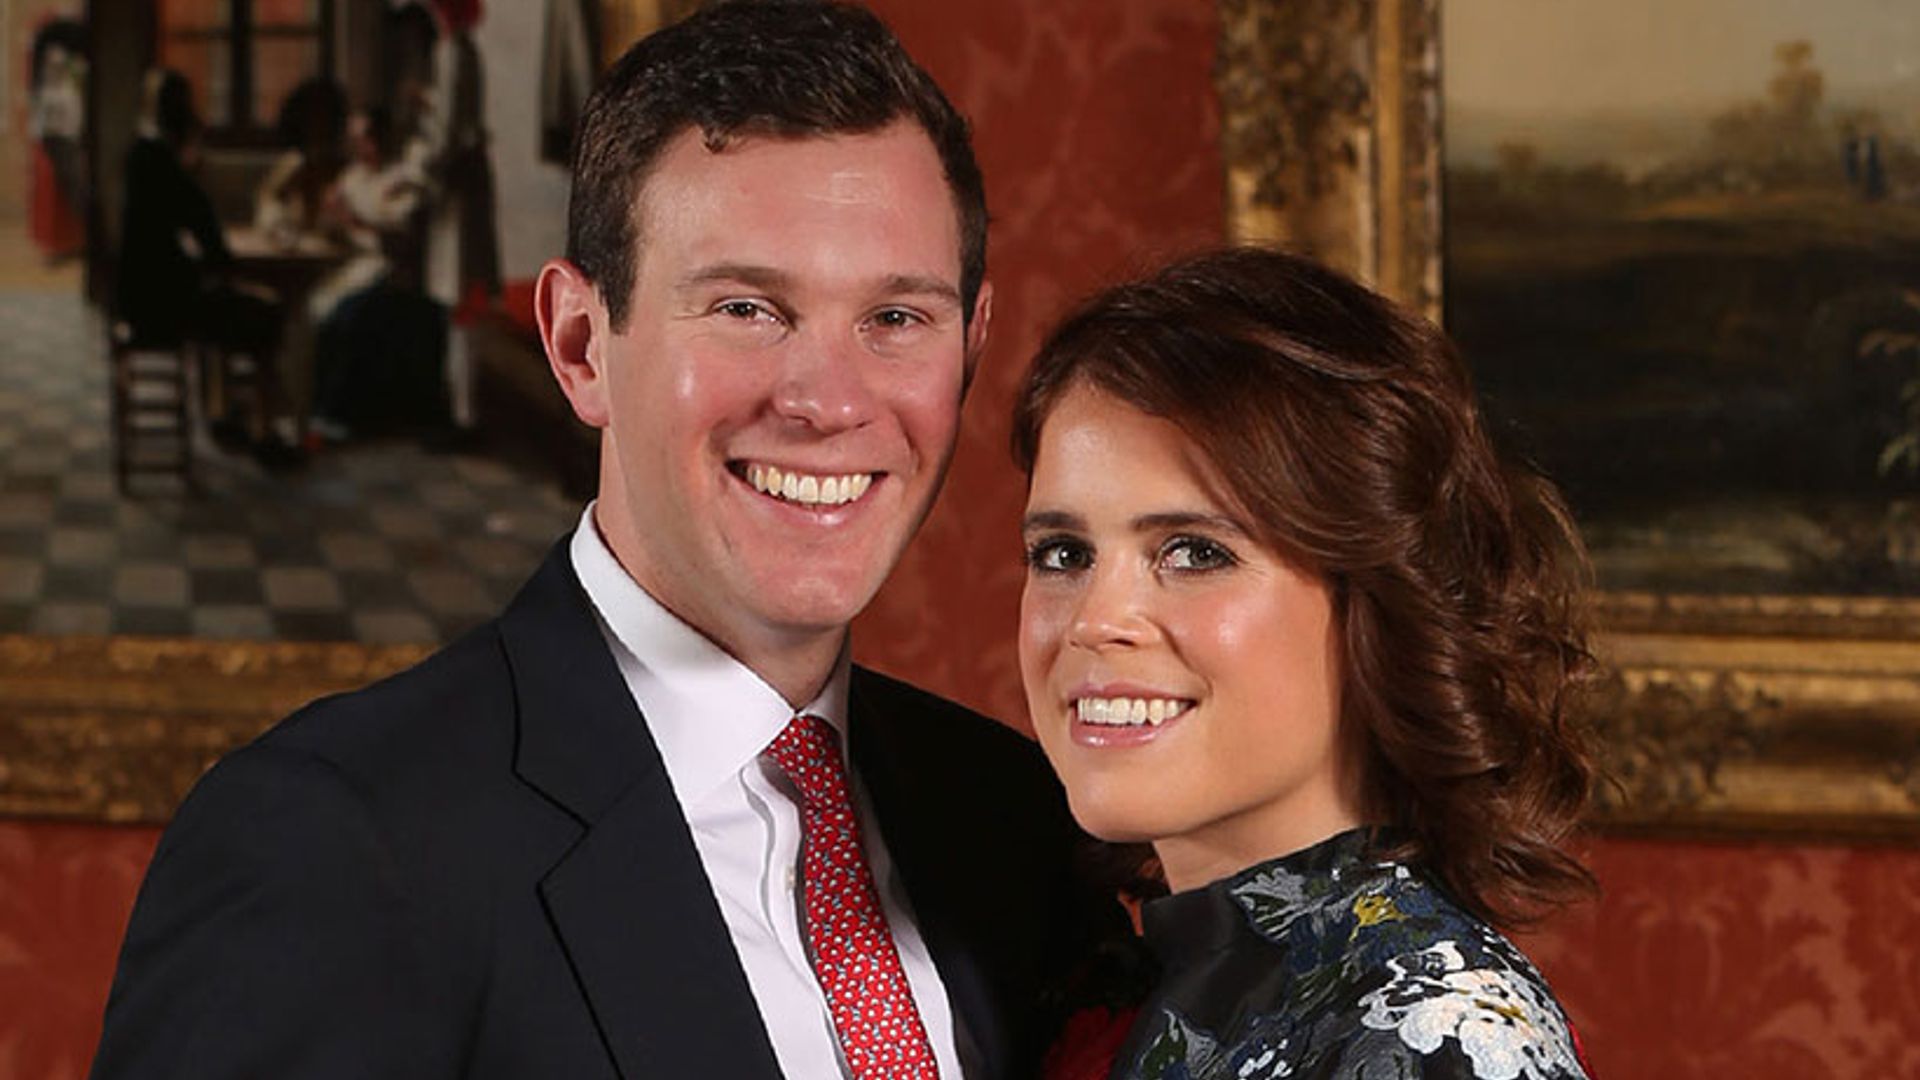 Is this the tiara that Princess Eugenie will wear on her wedding day?